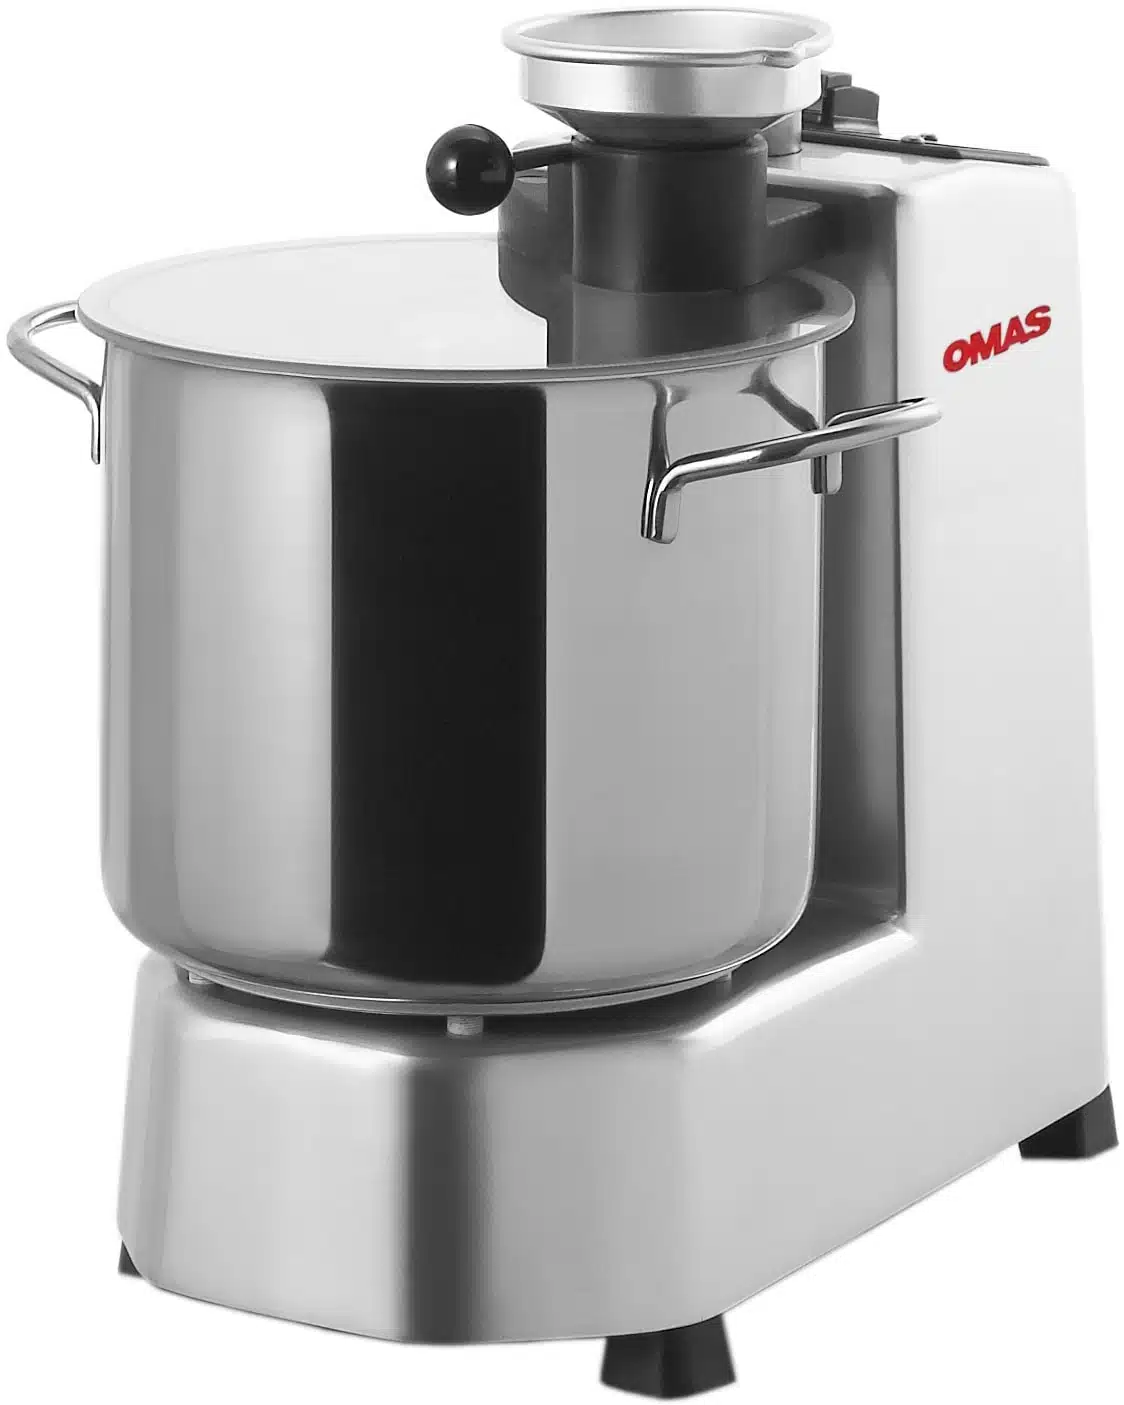 FP 50 Food Processor features a stainless-steel food bowl and cutting group, a transparent Perspex lid seamless processing,